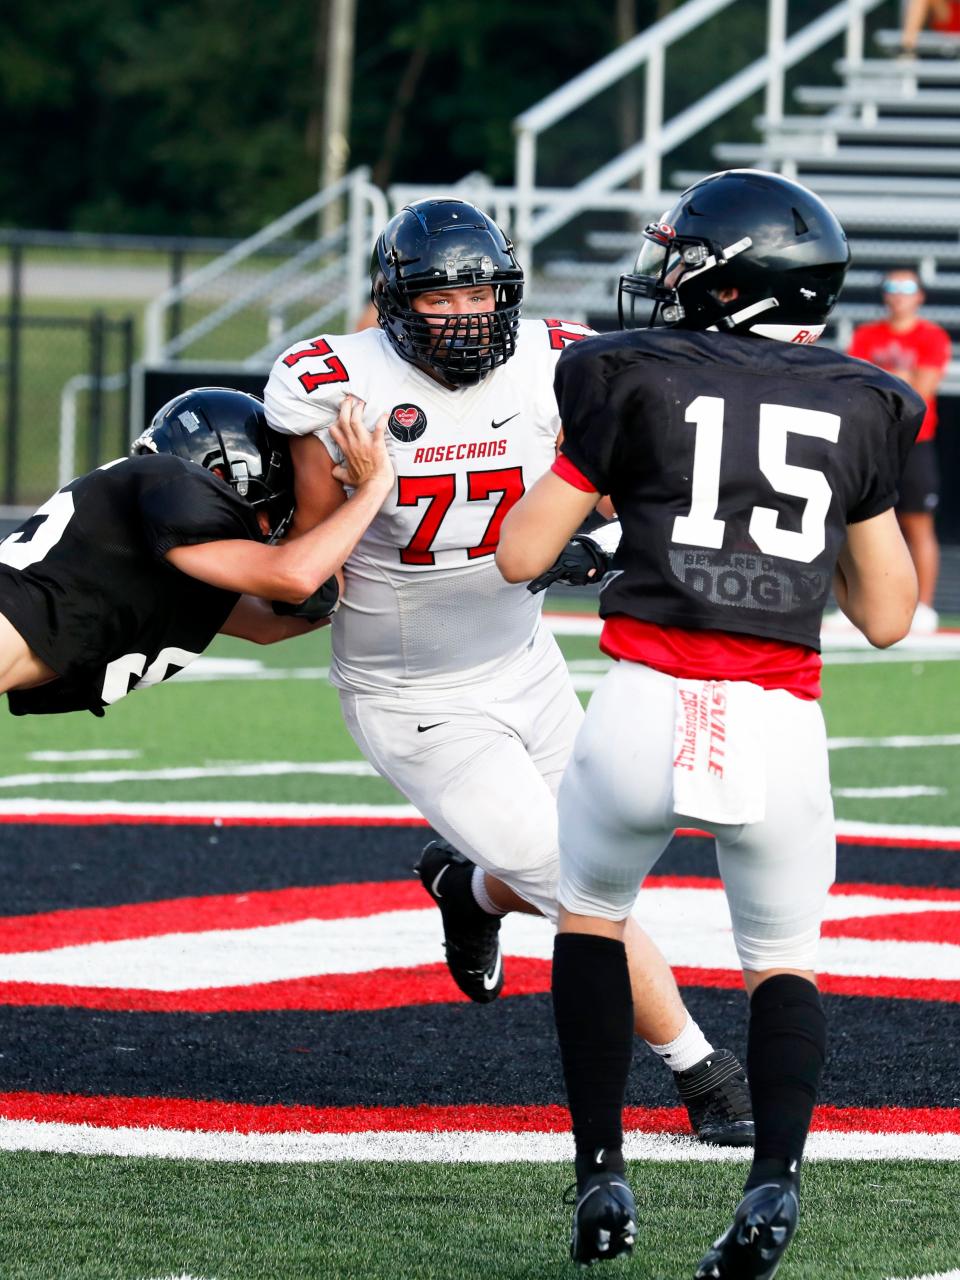 Rosecrans defensive end Xander Daniels rushes Crooksville quarterback Brayson Hill during a high school football scrimmage on Friday, Aug. 4, 2023, in McLuney, Ohio. Daniels is among the top returners for the Bishops' defense.